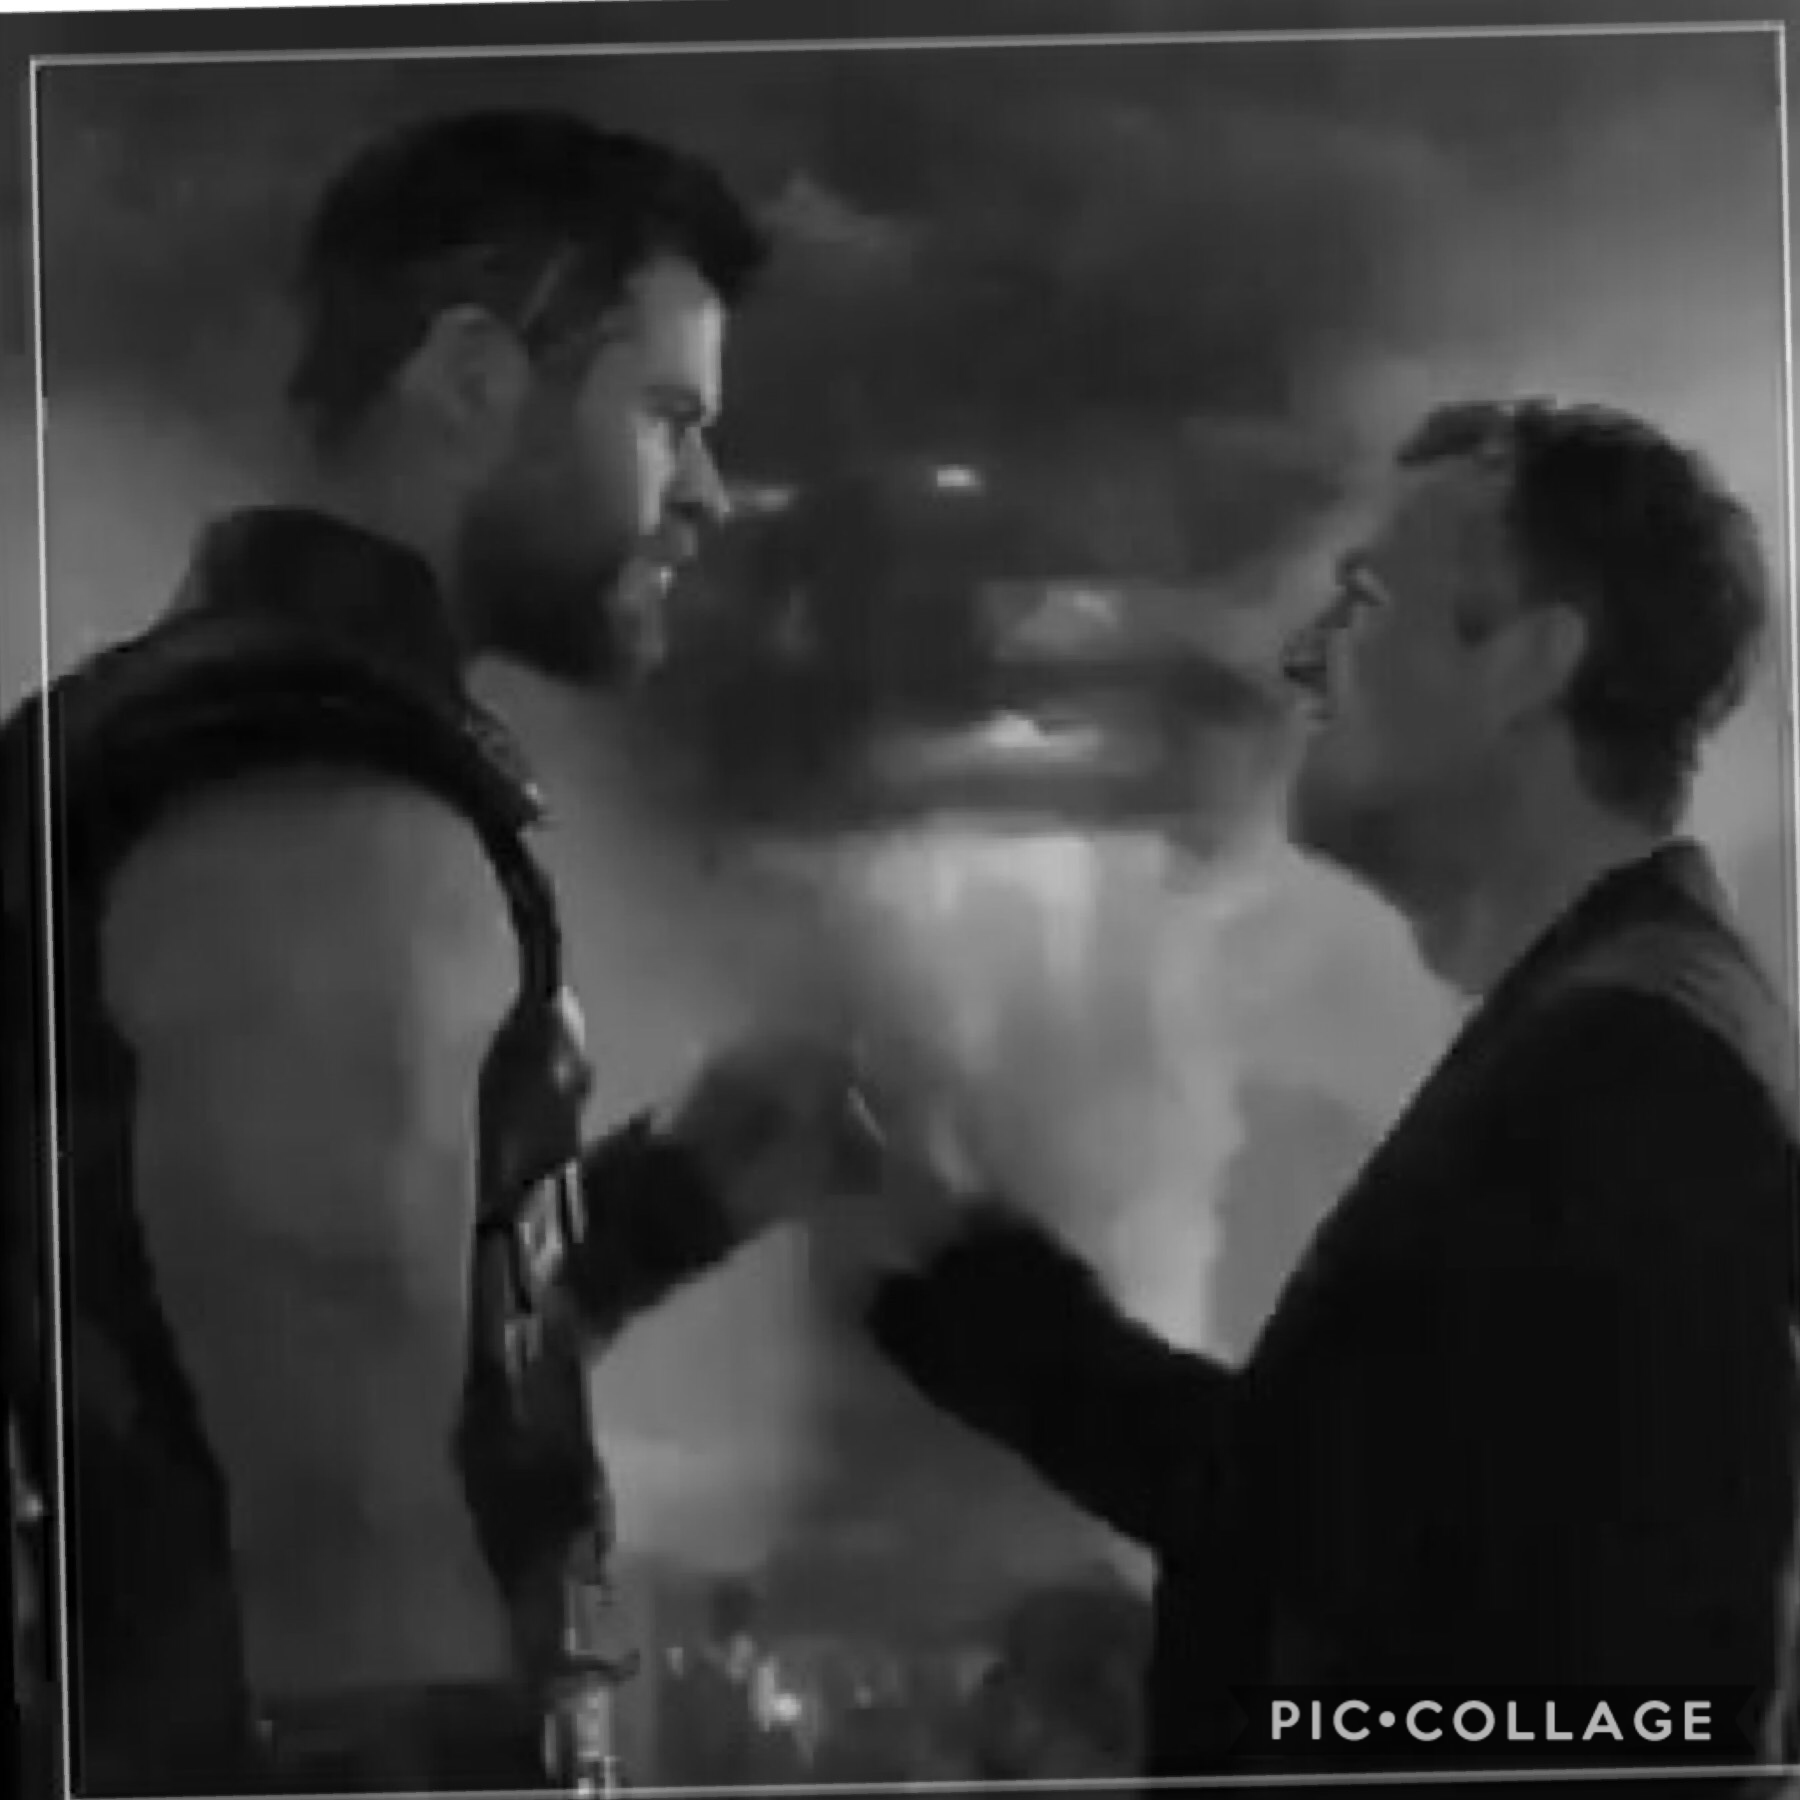 it’s missing thorbruce hours...